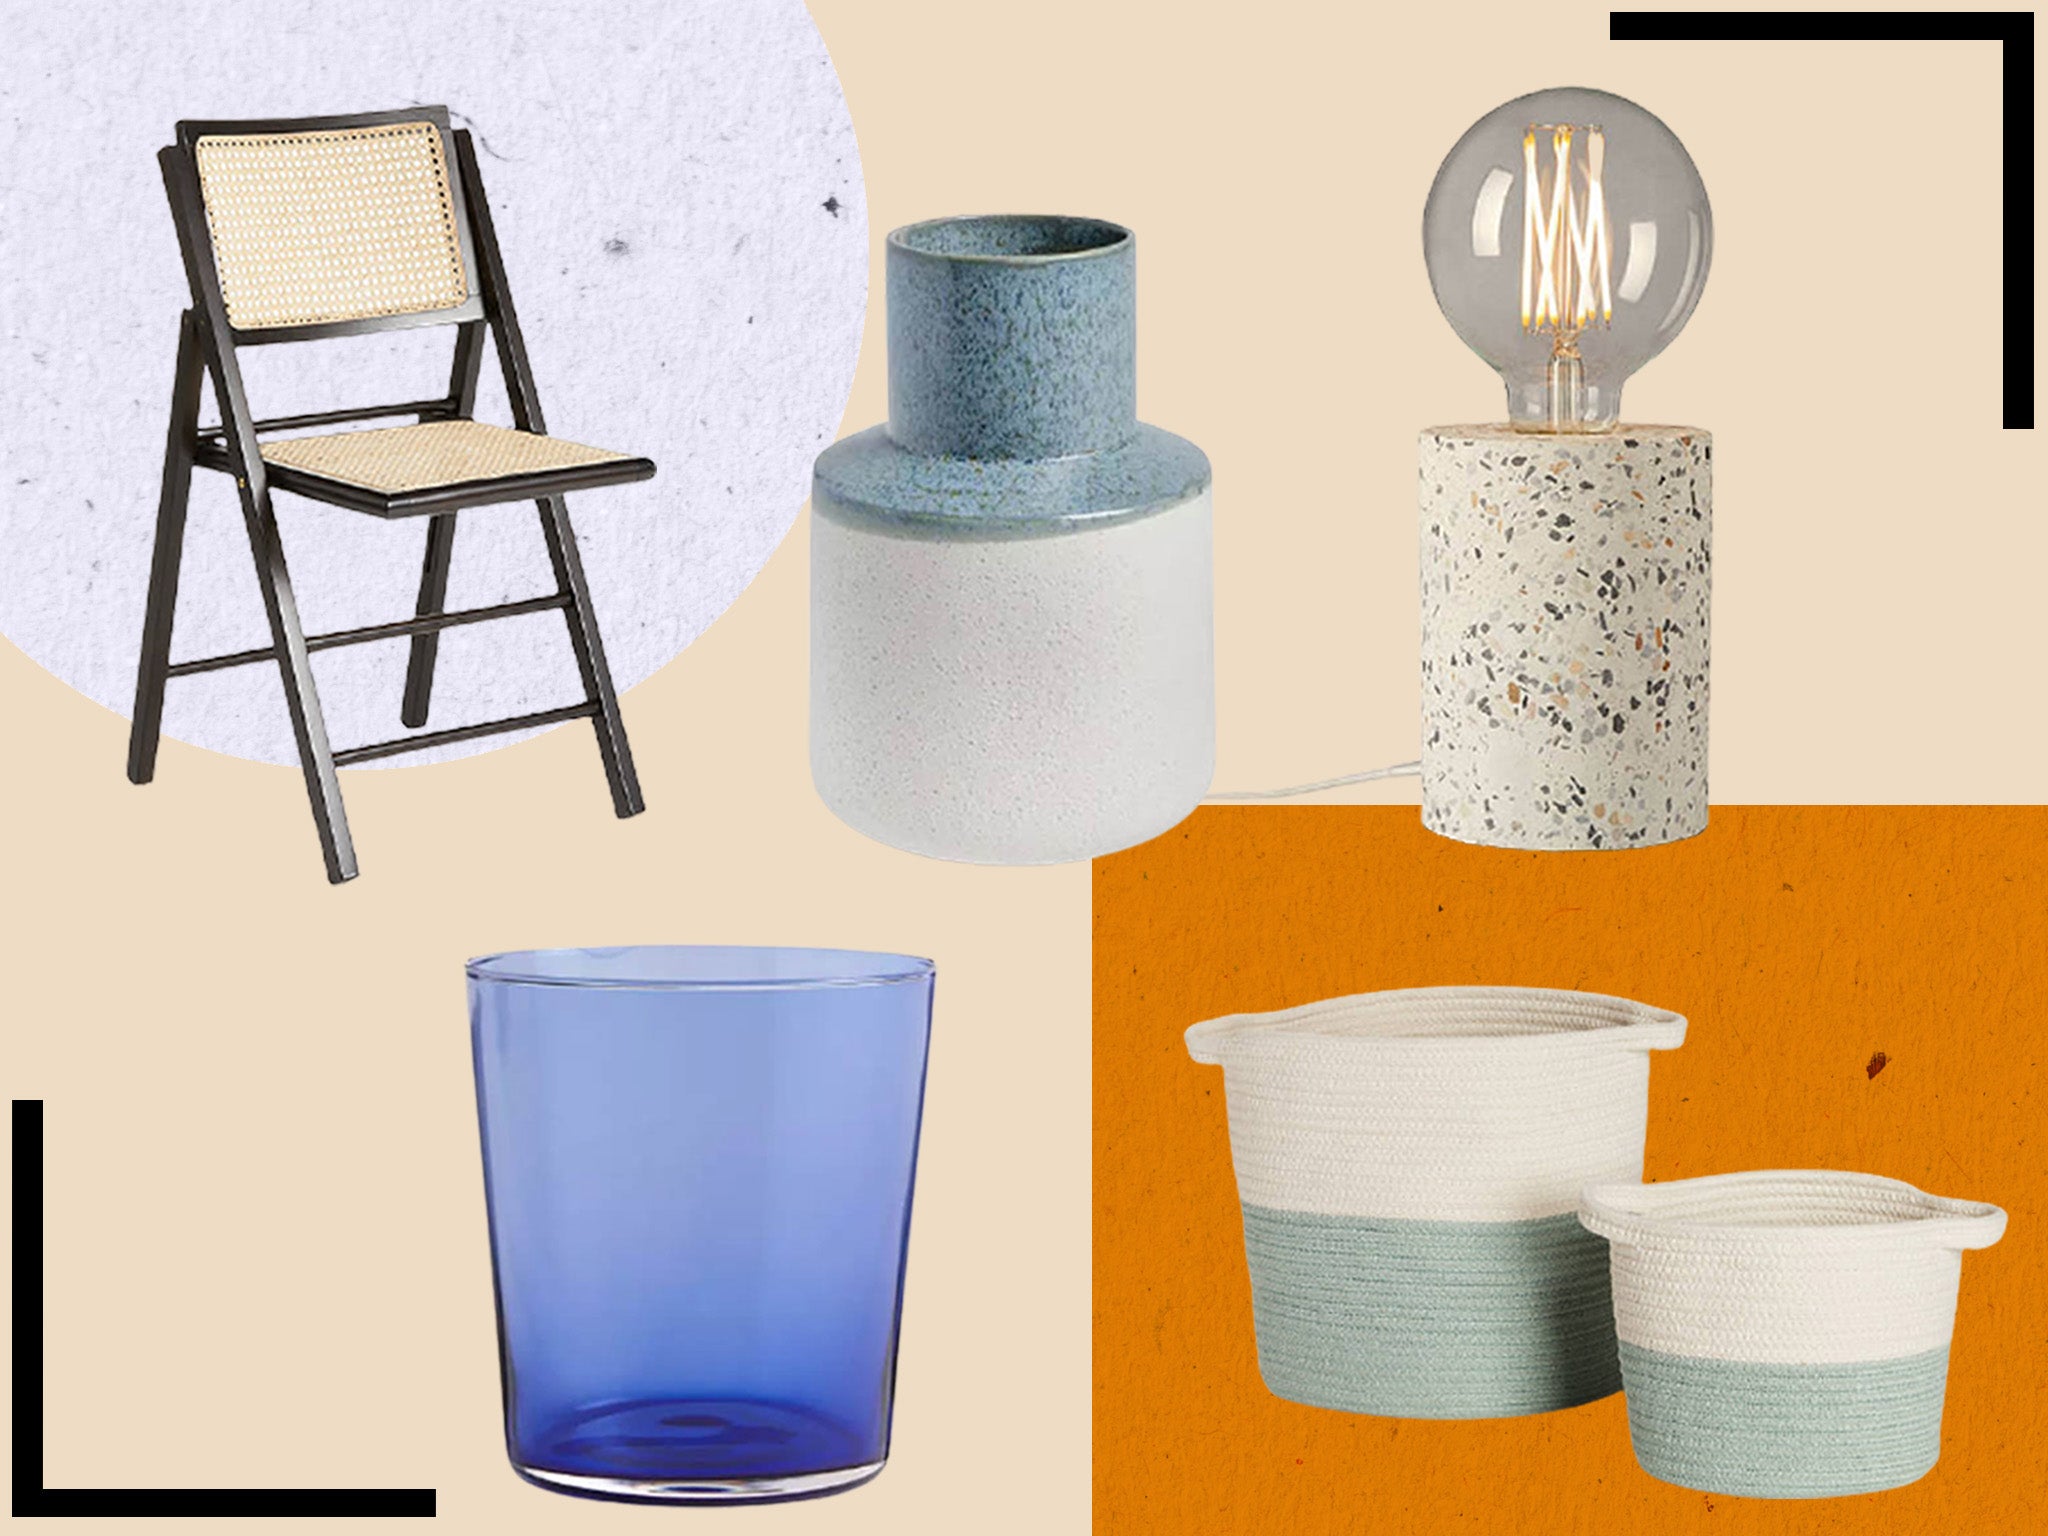 From furniture to accessories, there’s more than 2,400 products to explore